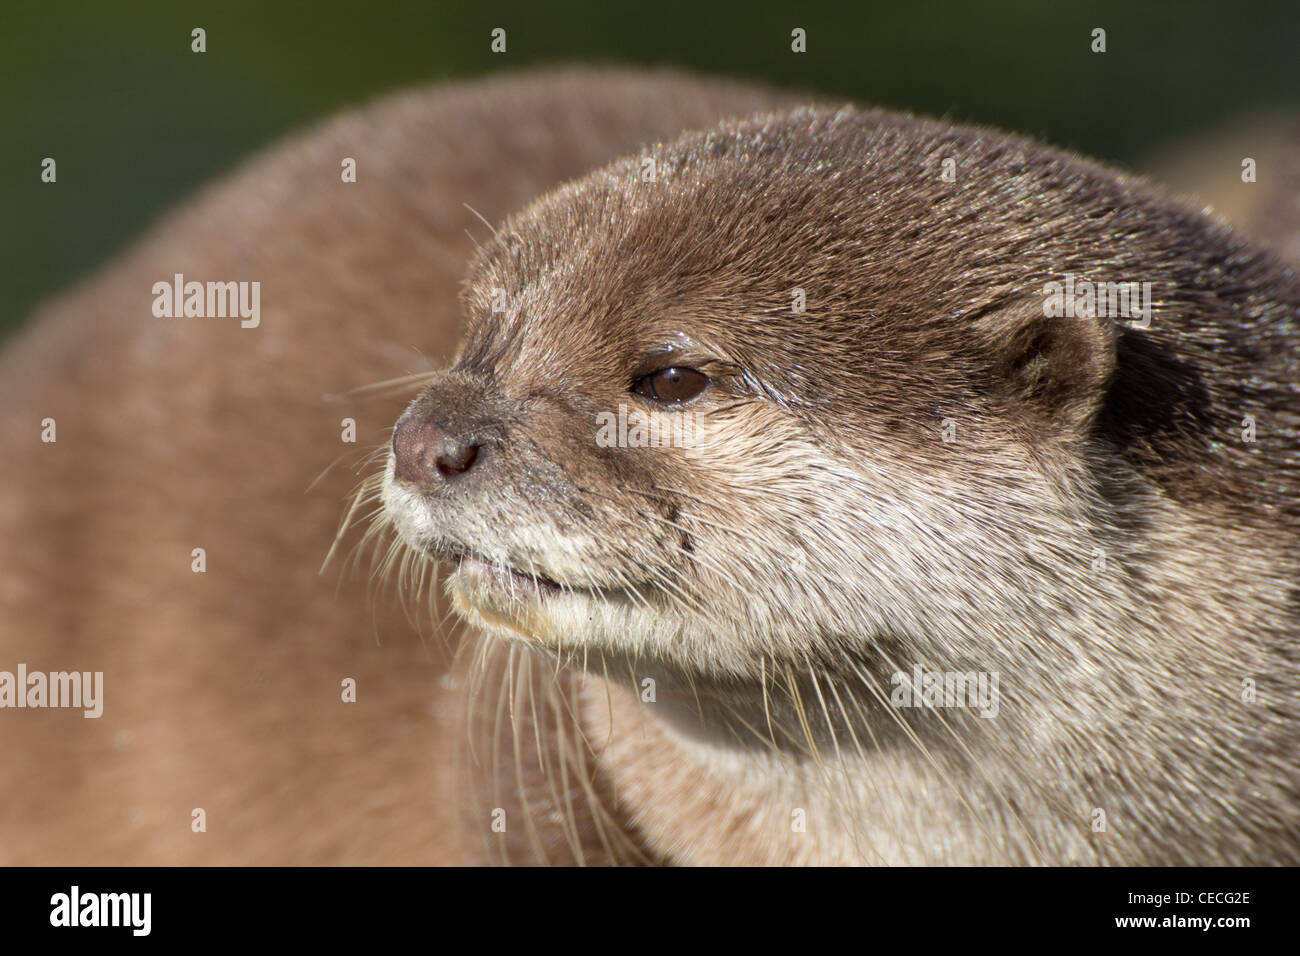 A portrait of an Oriental Short-Clawed Otter Stock Photo